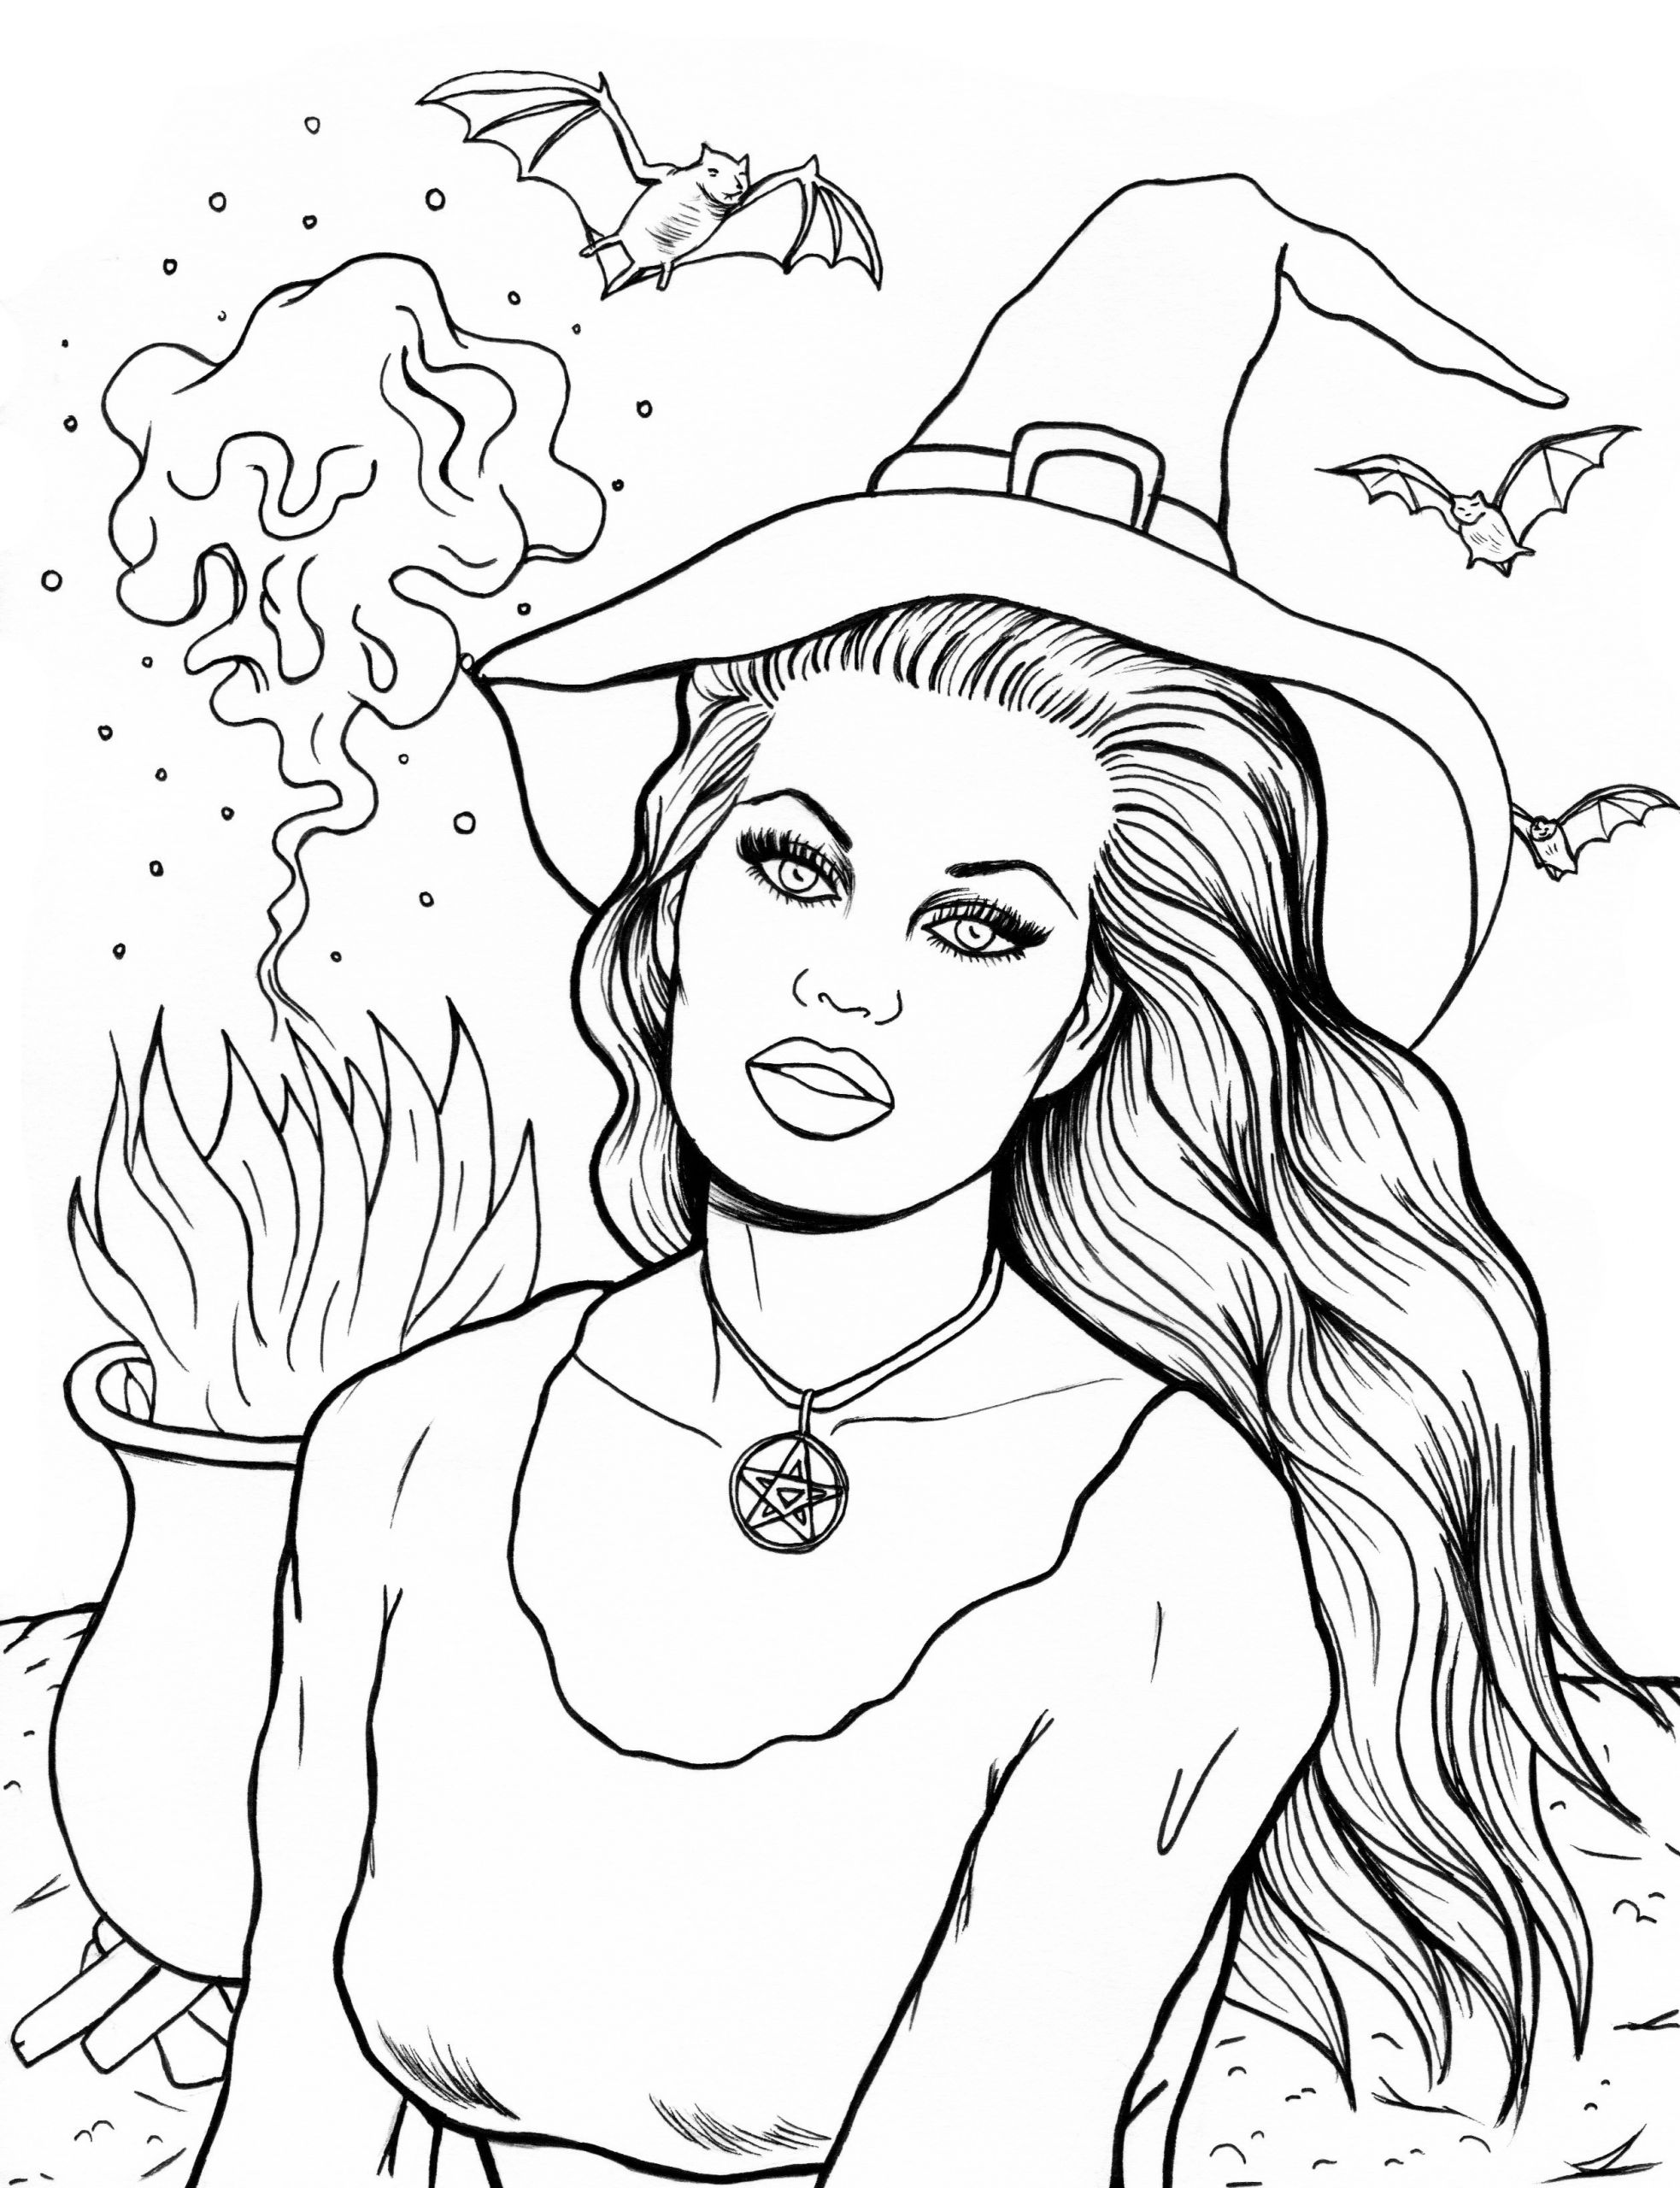 Printable Halloween Coloring Pages
 Rookie Saturday Printable Halloween Coloring Pages